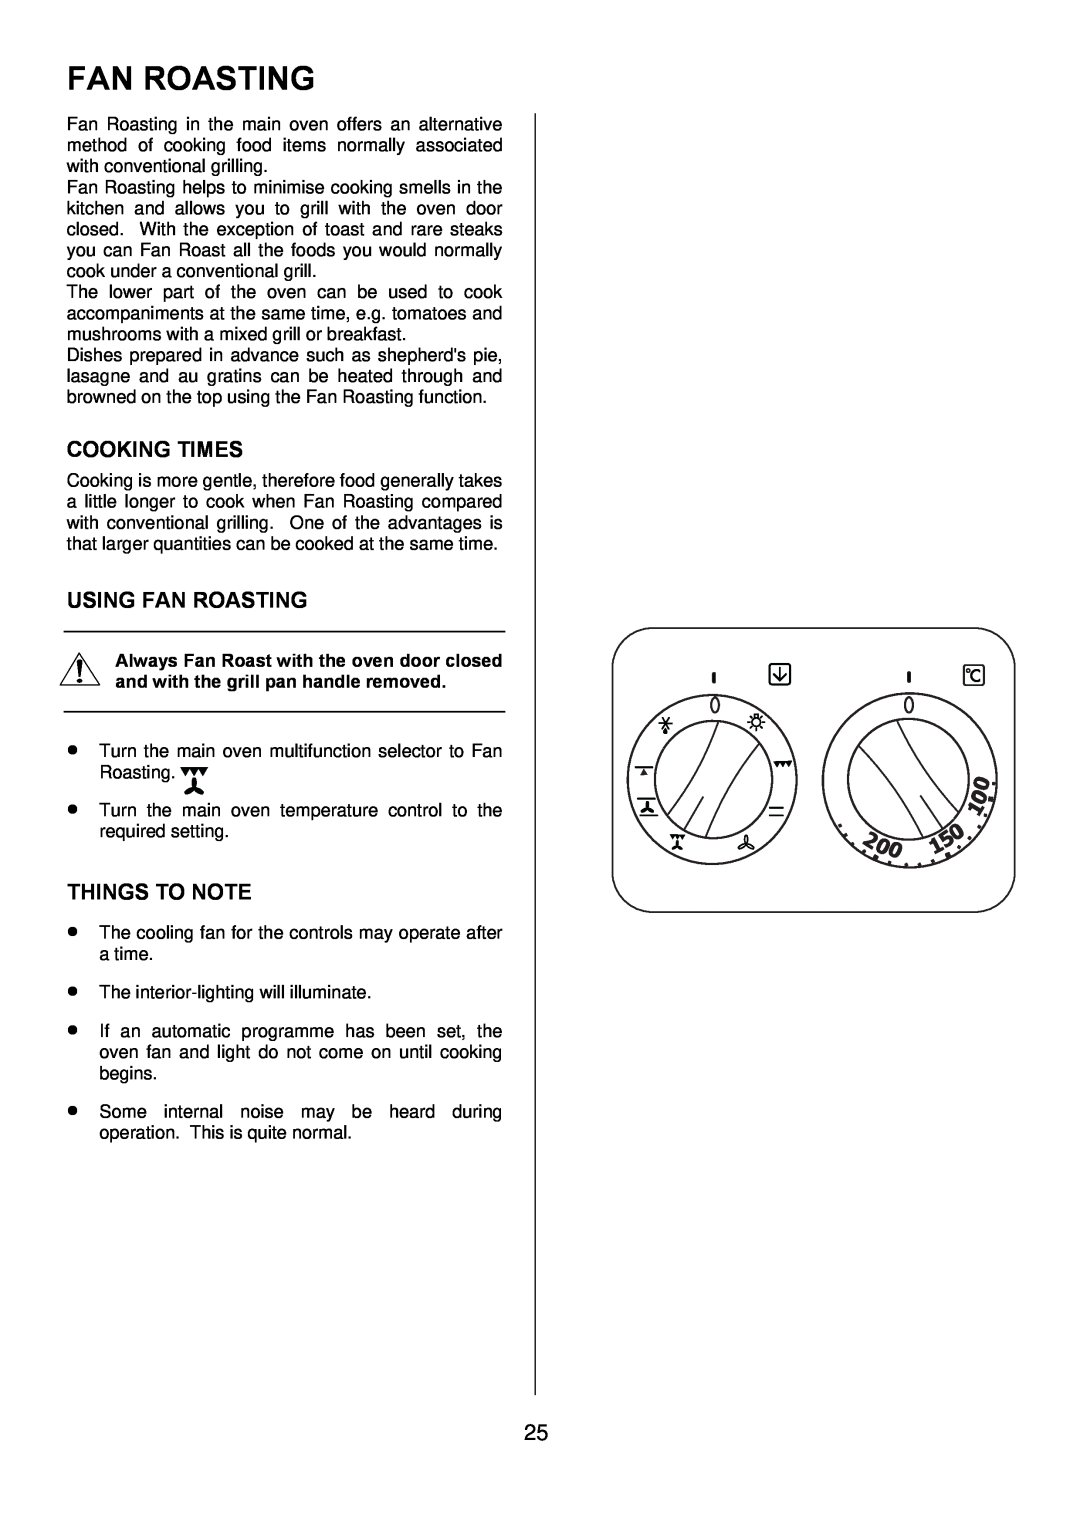 Electrolux D77000GF operating instructions Cooking Times, Using Fan Roasting, Things To Note 